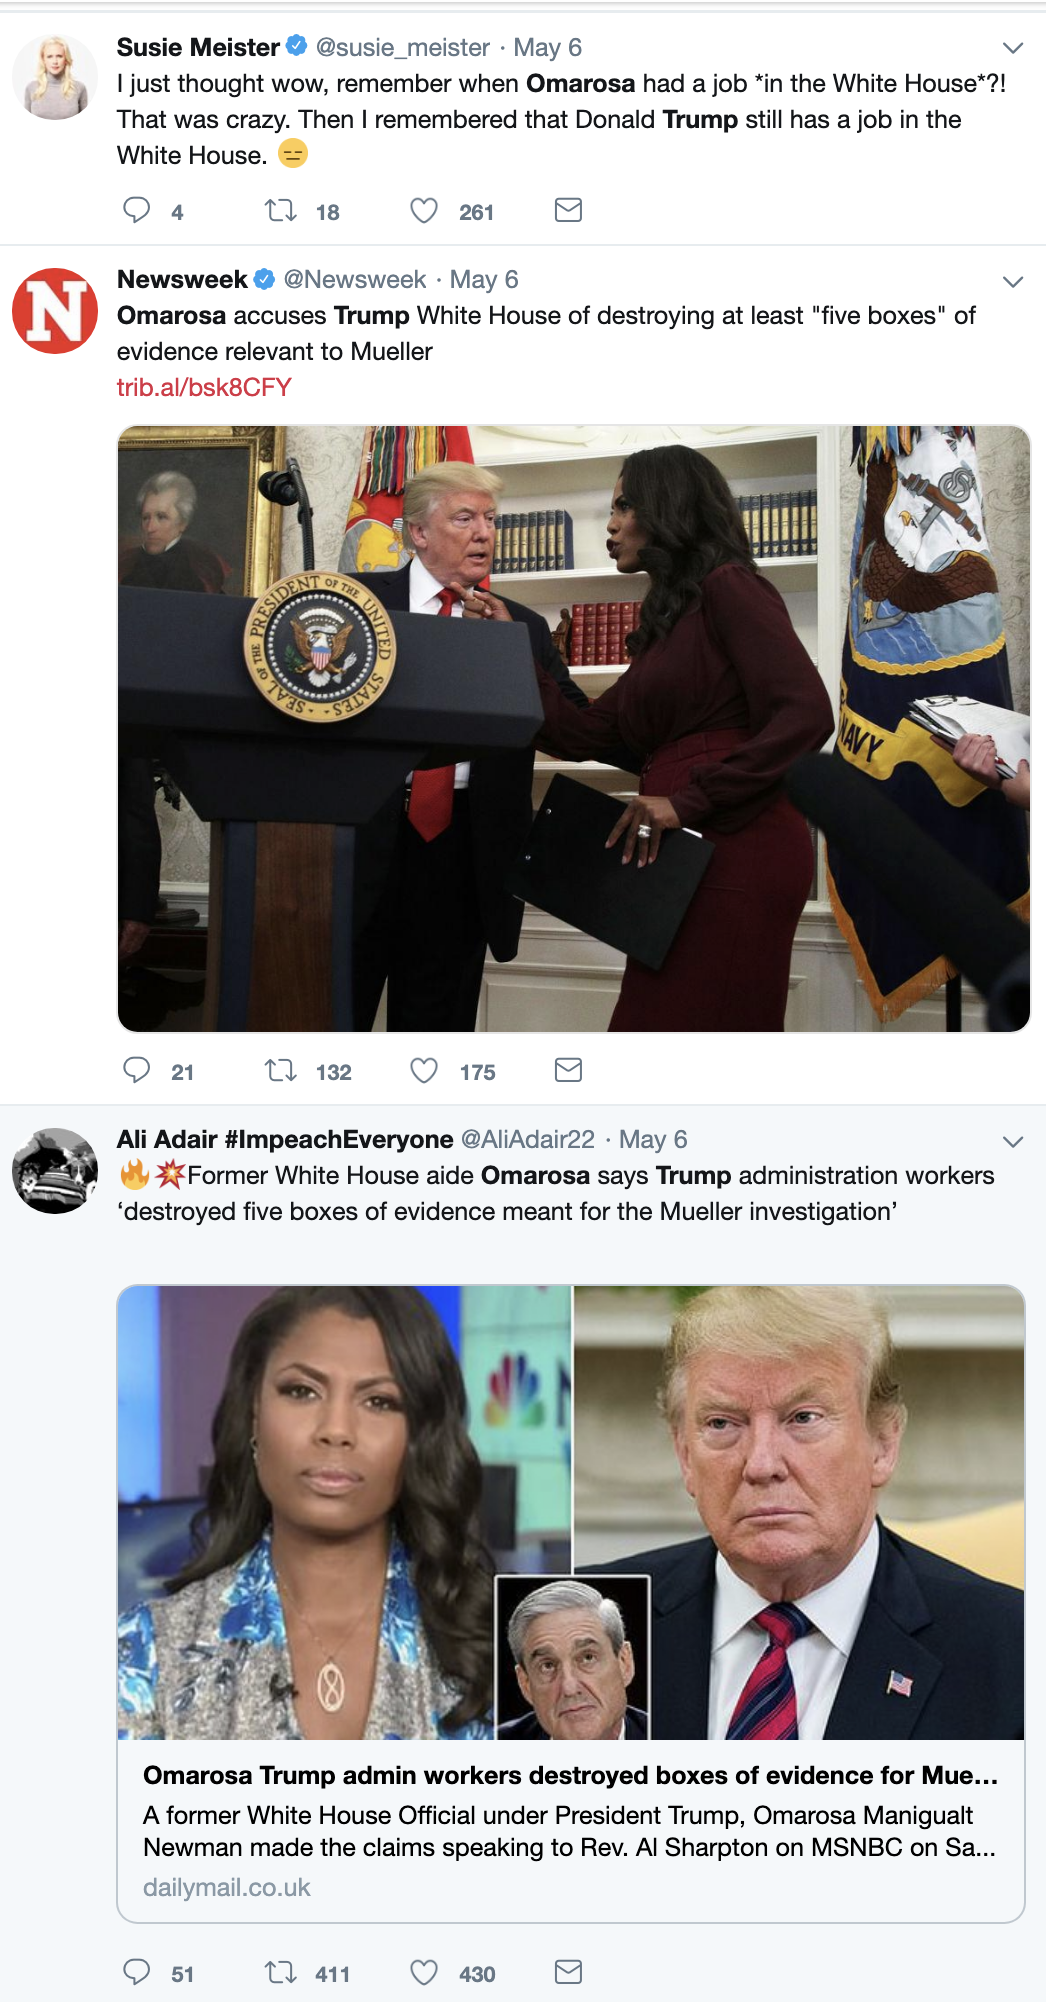 Screen-Shot-2019-05-13-at-2.04.56-PM Trump Administration Hit With Discrimination Lawsuit From Ex-Staffer Corruption Crime Donald Trump Economy Feminism Labor Politics Racism Sexism Top Stories Women's Rights 